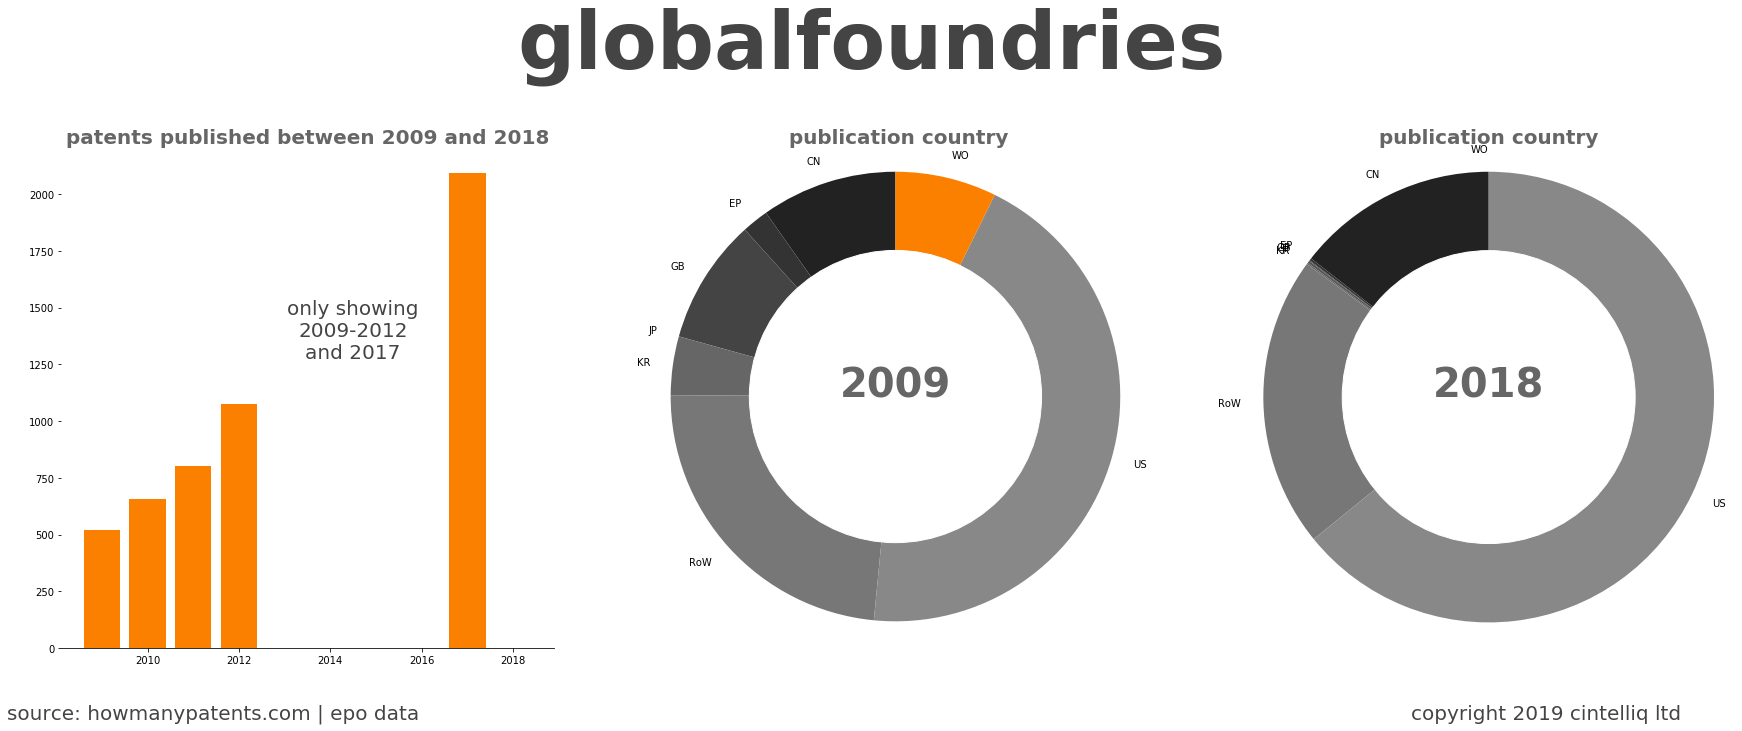 summary of patents for Globalfoundries